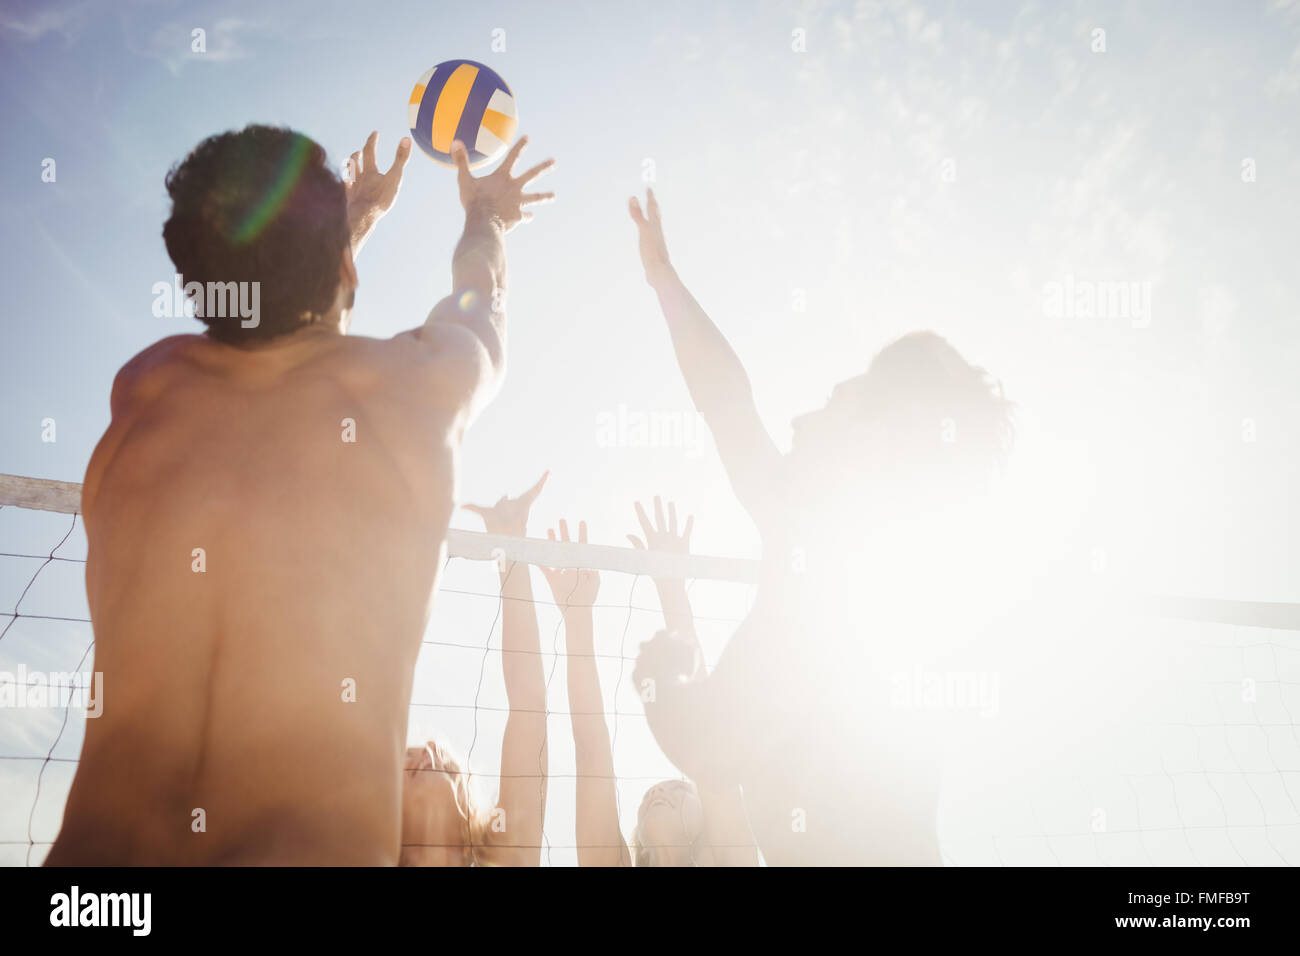 Friends playing beach volleyball Stock Photo